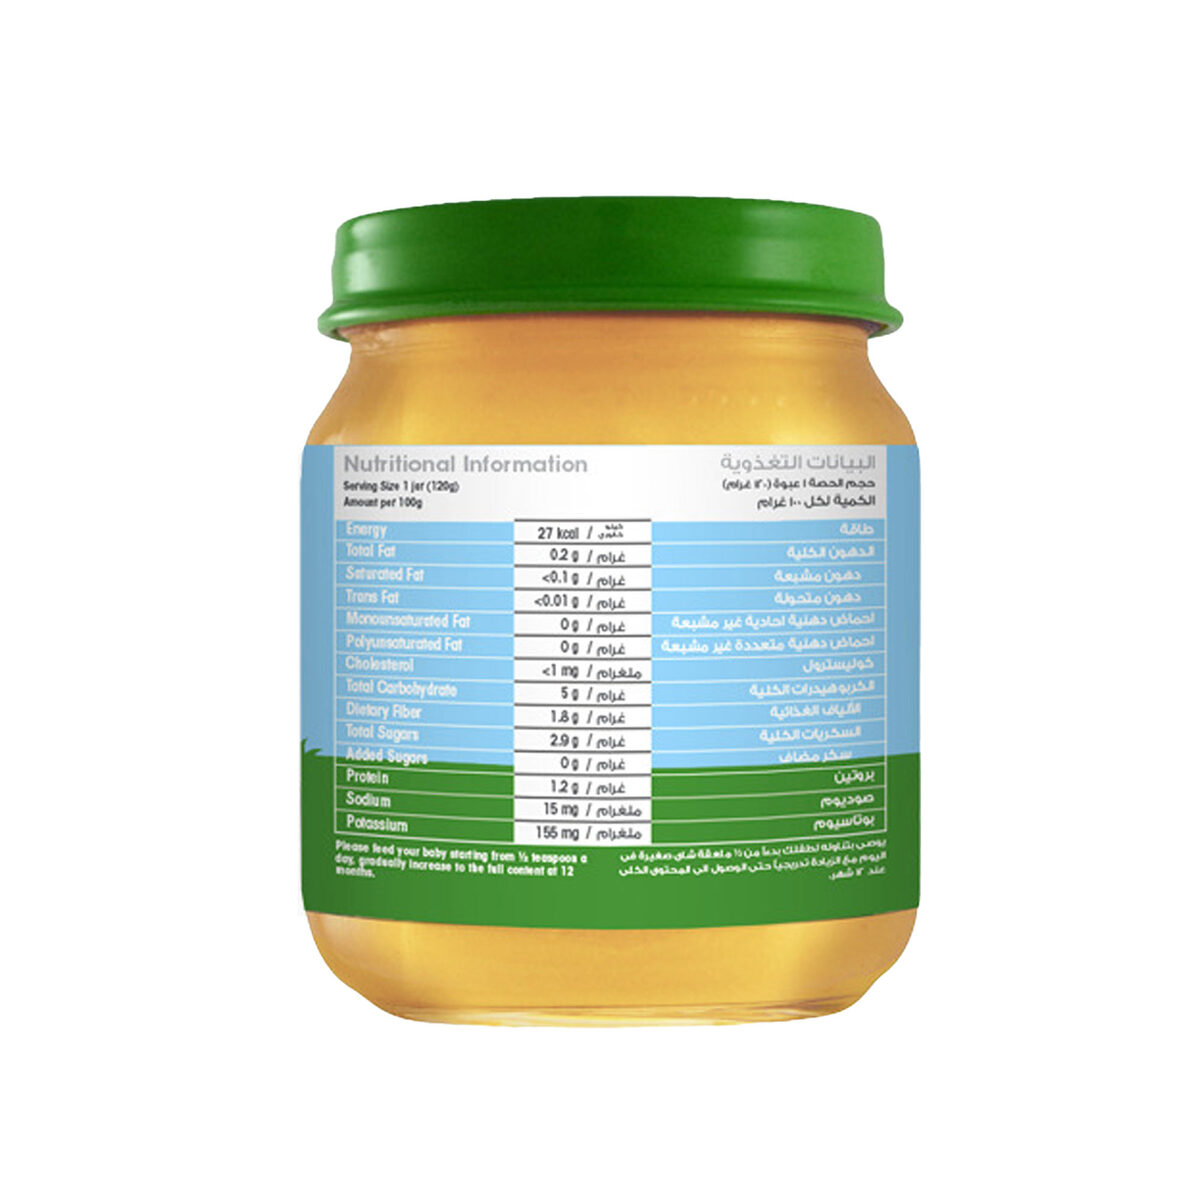 Heinz Baby Food Mixed Vegetable Puree Jar For 6+ Months 120g